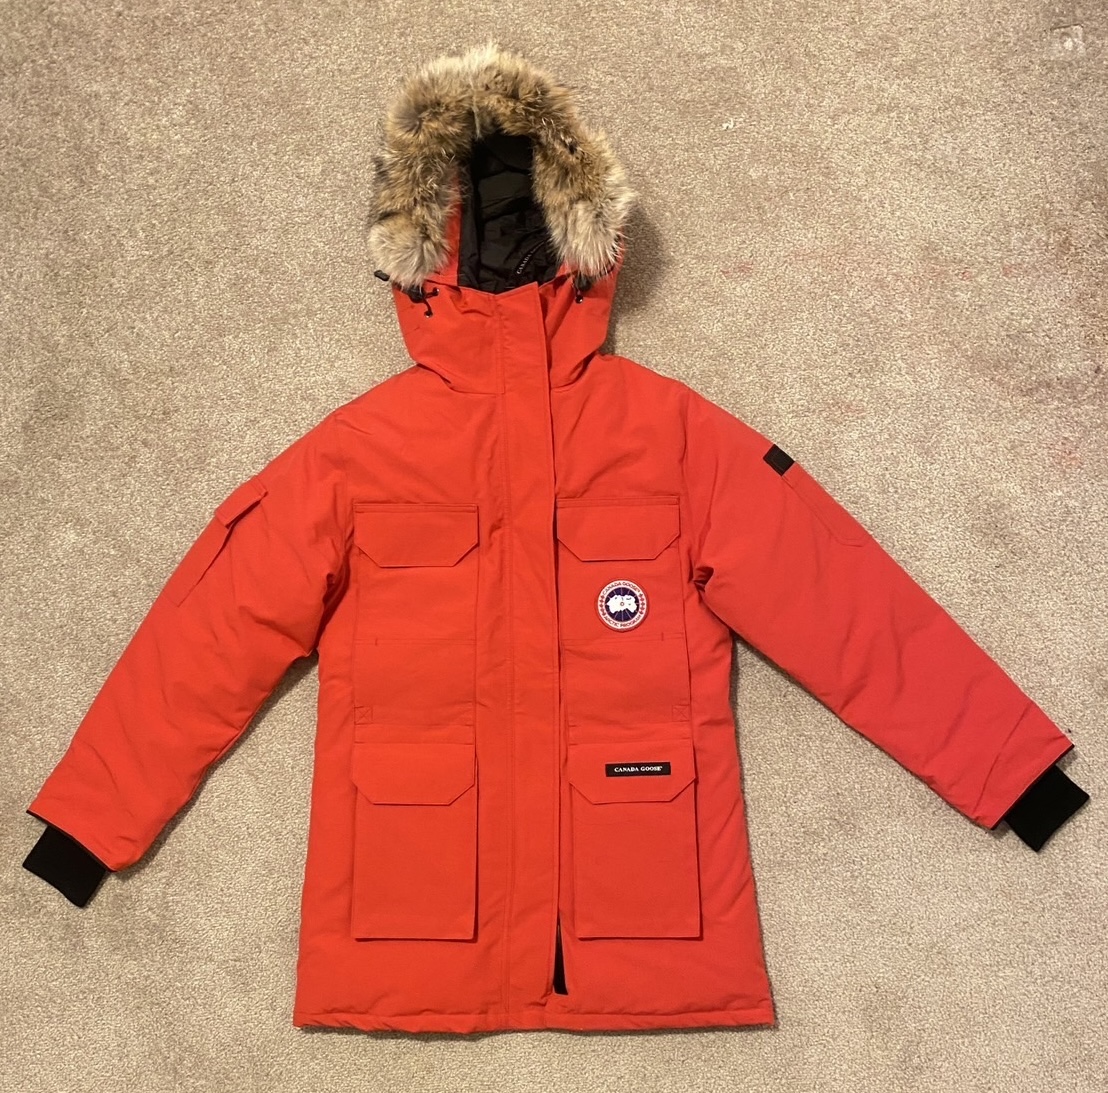 Winter Clothing Rental in Yellowknife